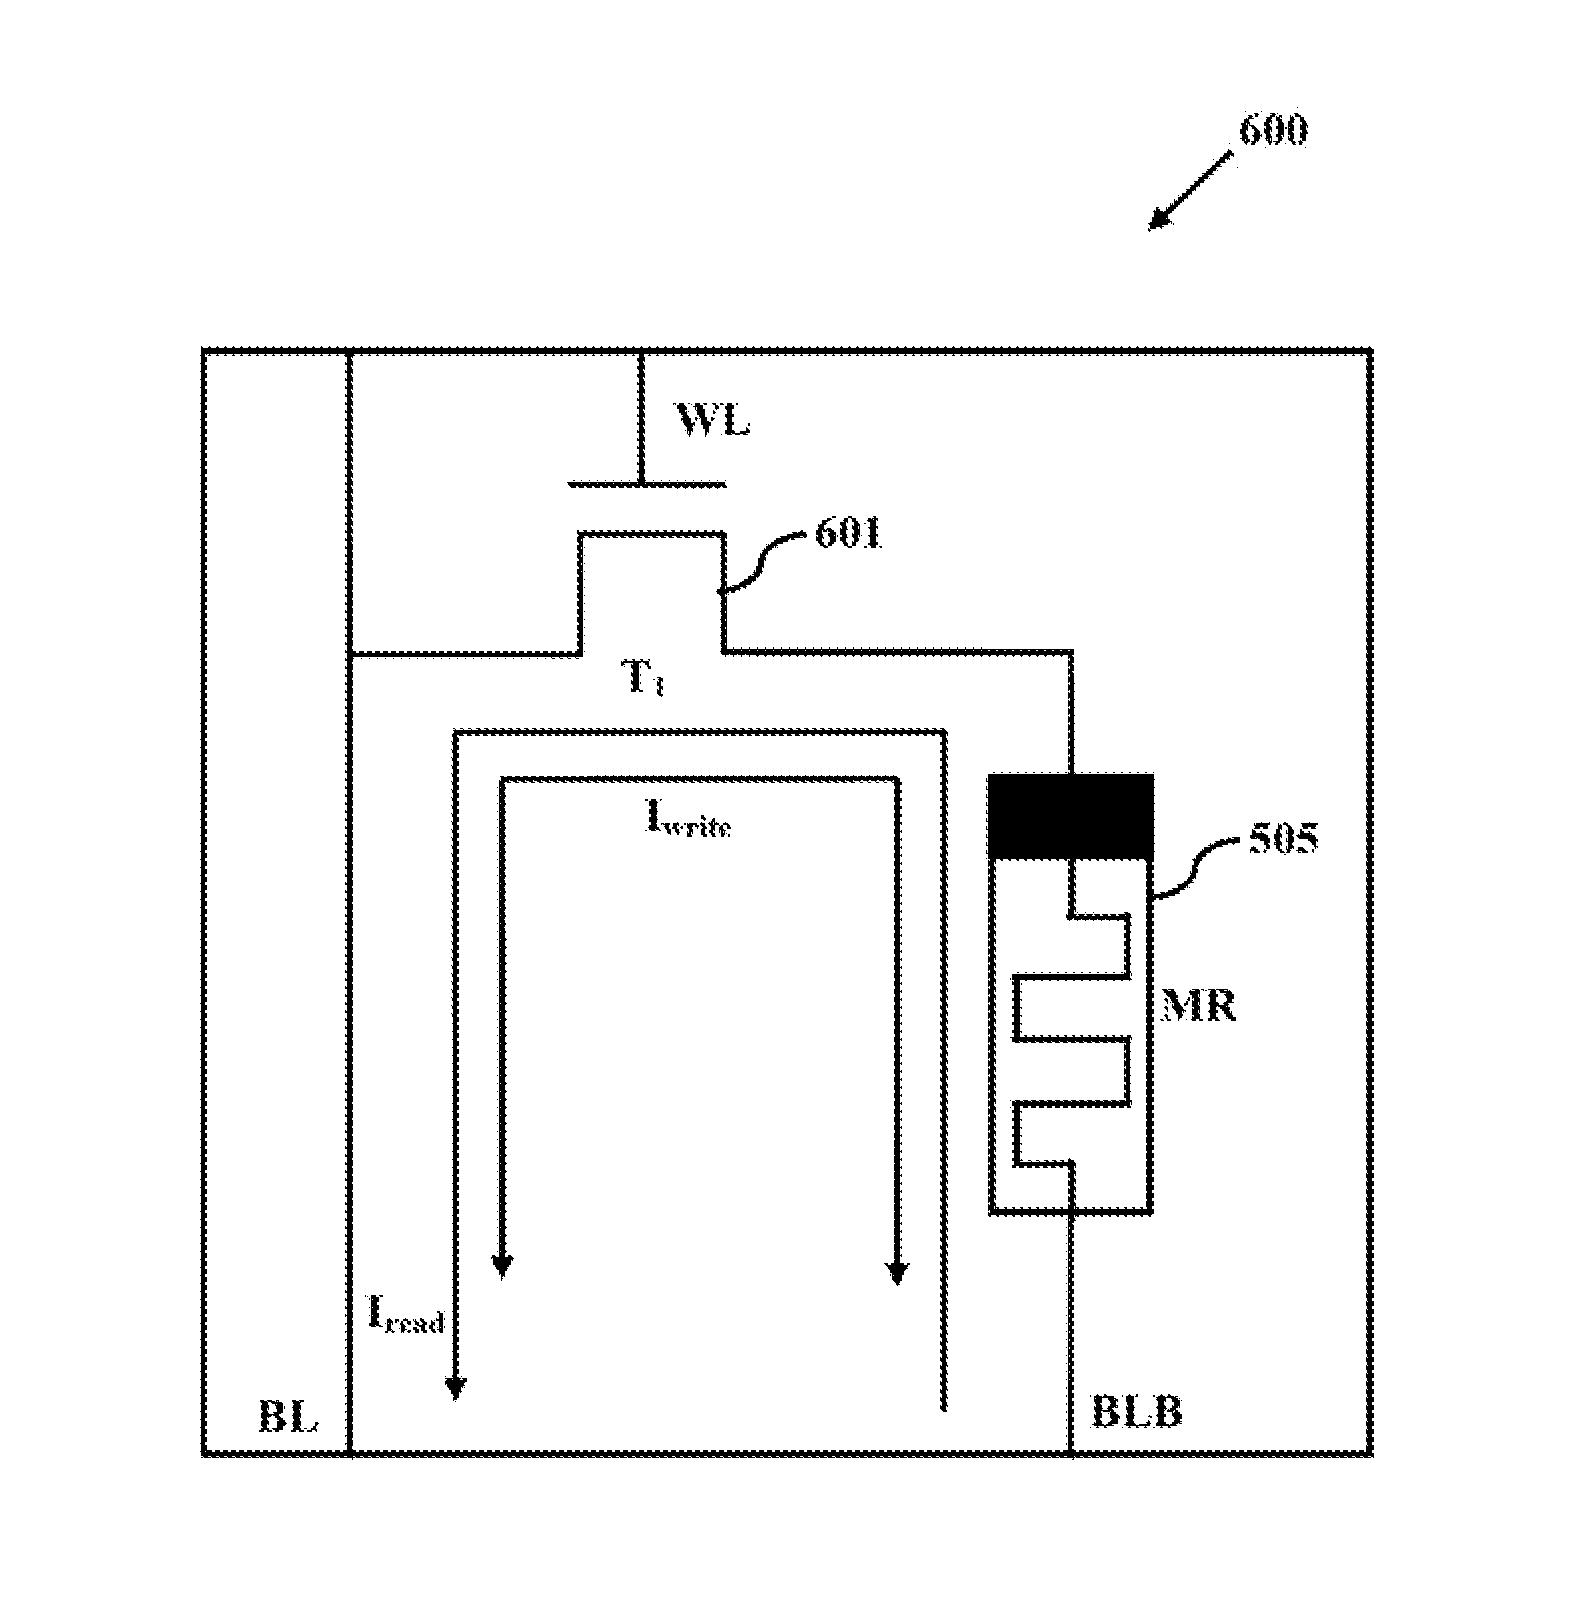 System and a method for designing a hybrid memory cellwith memristor and complementary metal-oxide semiconductor